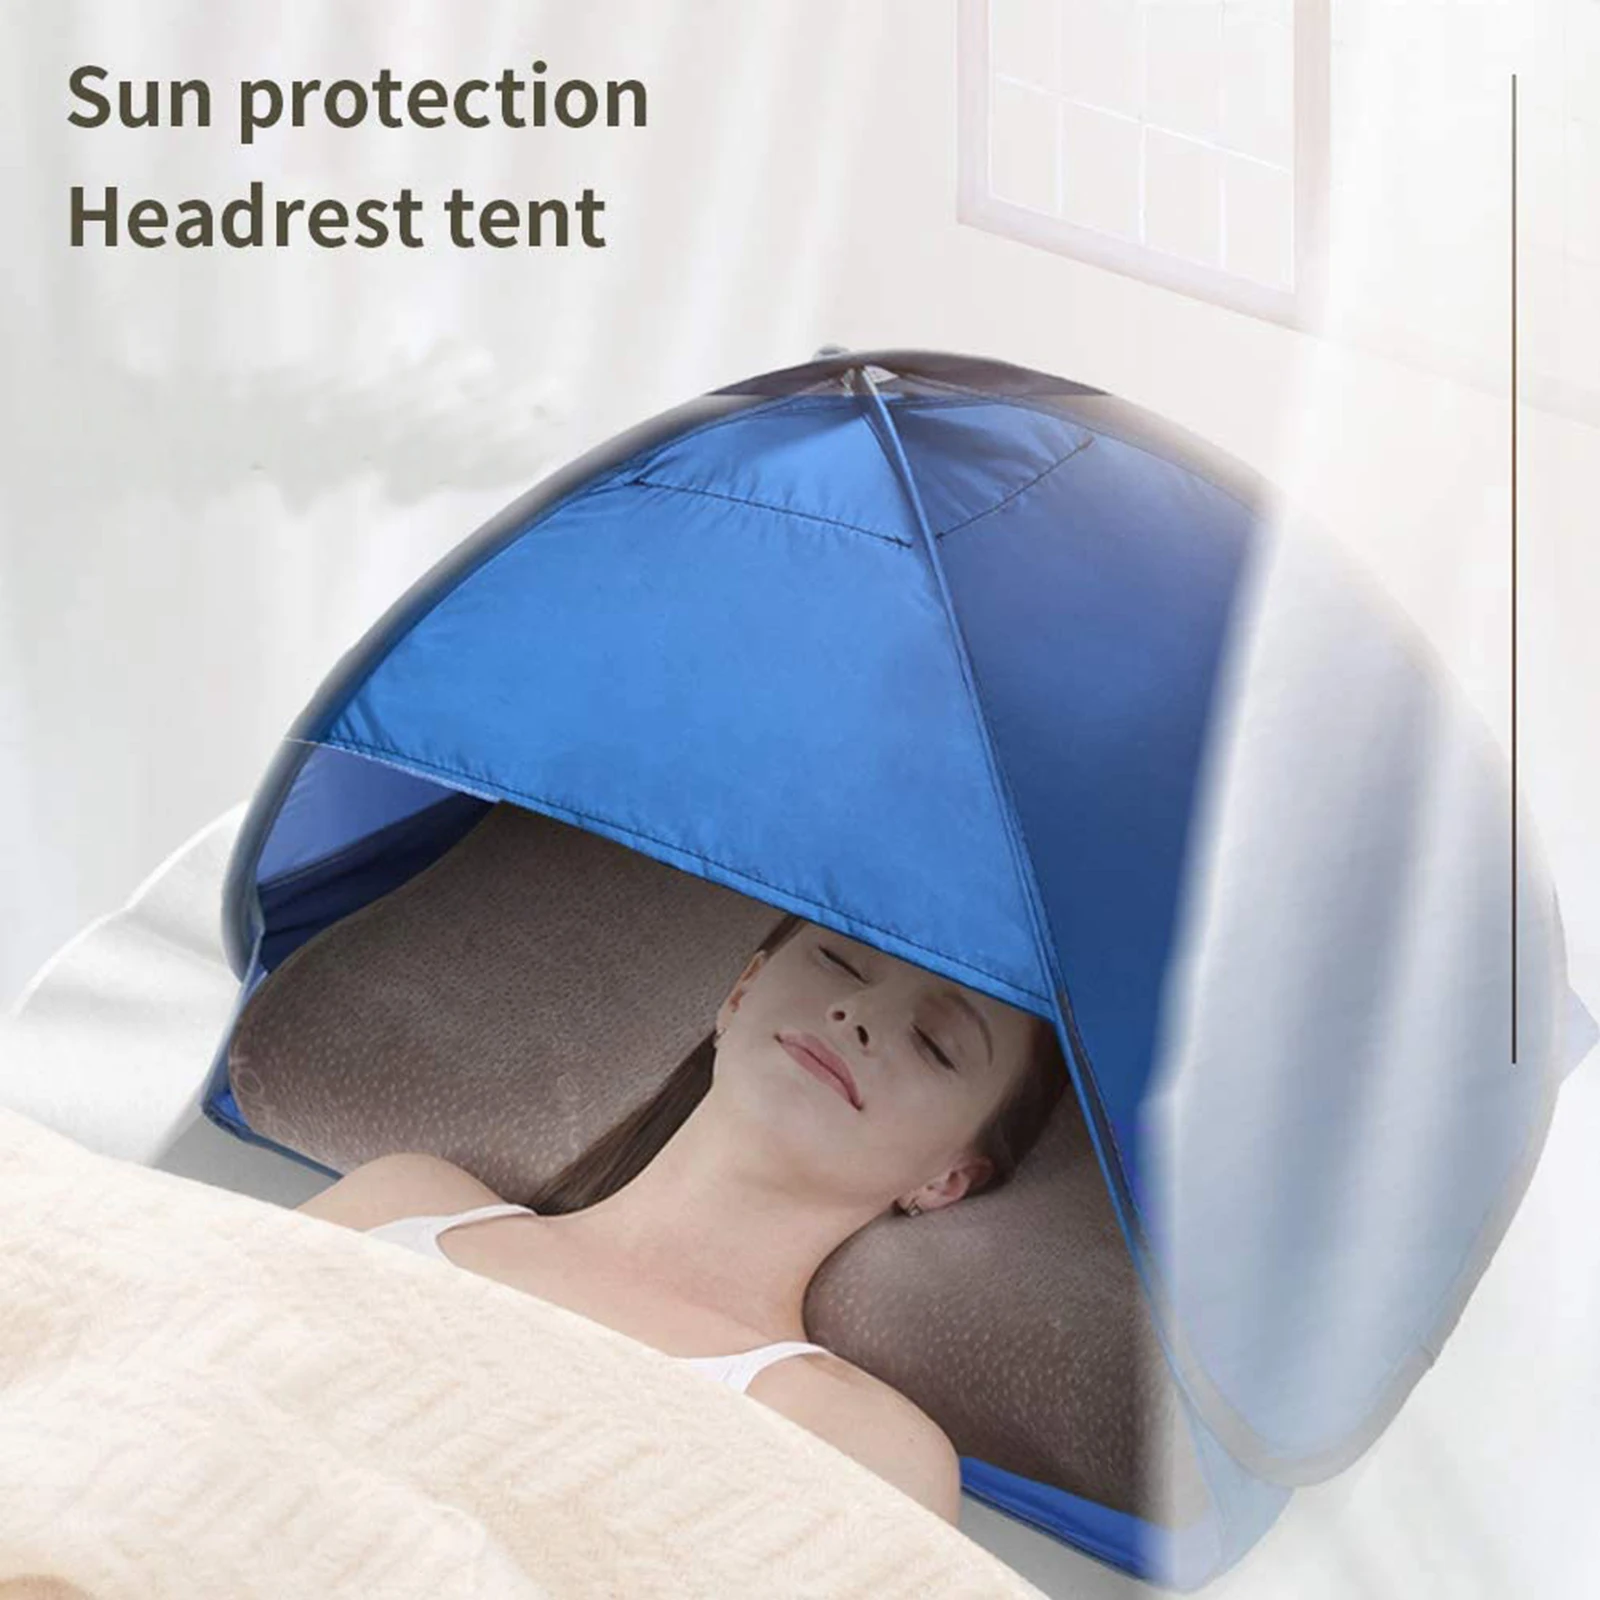 Mini Automatic Shade Tent Lounger Canopy Beach Tents Sun Shelter Anti-UV Pet Tent Outdoor Picnic Beach Camping Fishing Hiking